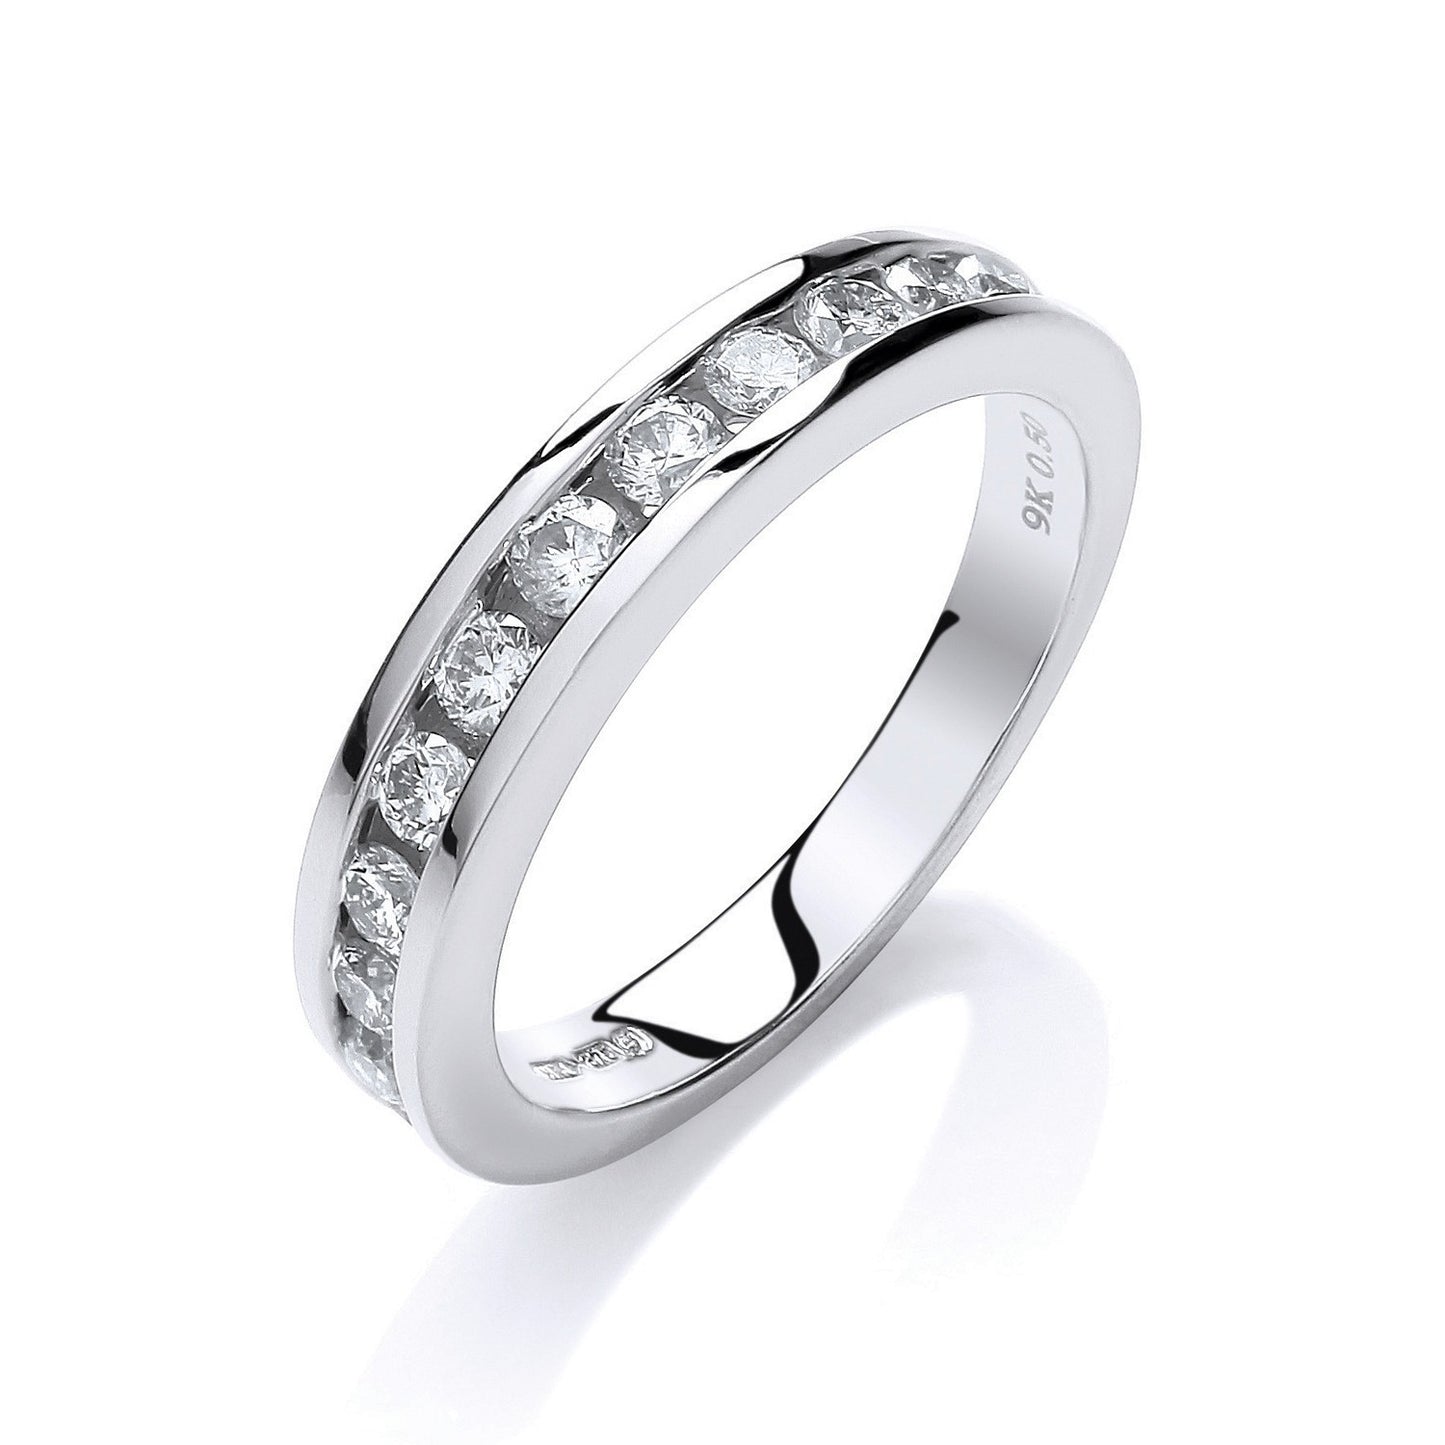 0.50ct Diamond Channel Set Half Eternity Ring in 9ct White Gold